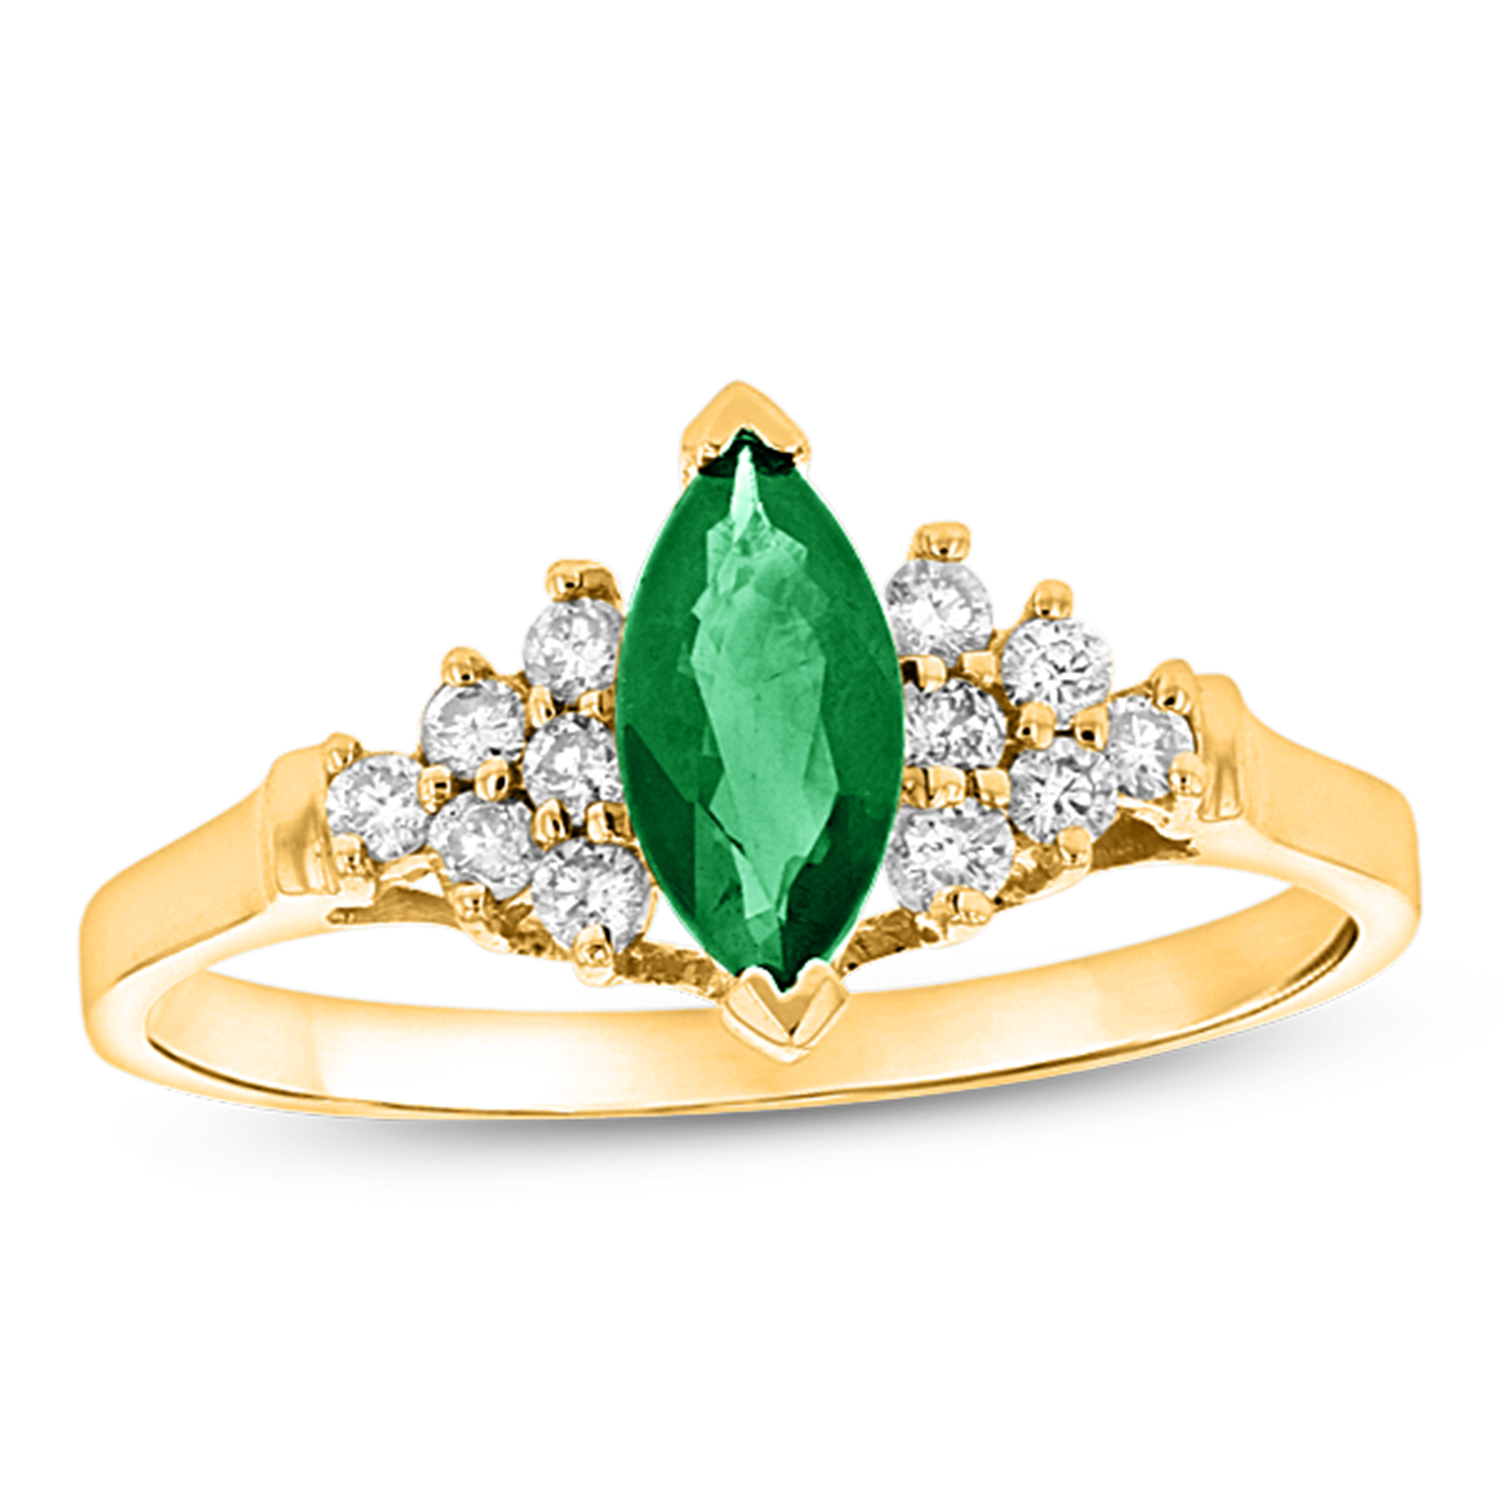 0.69ctw Diamond and Marquis Emerald Ring in 14k Yellow Gold